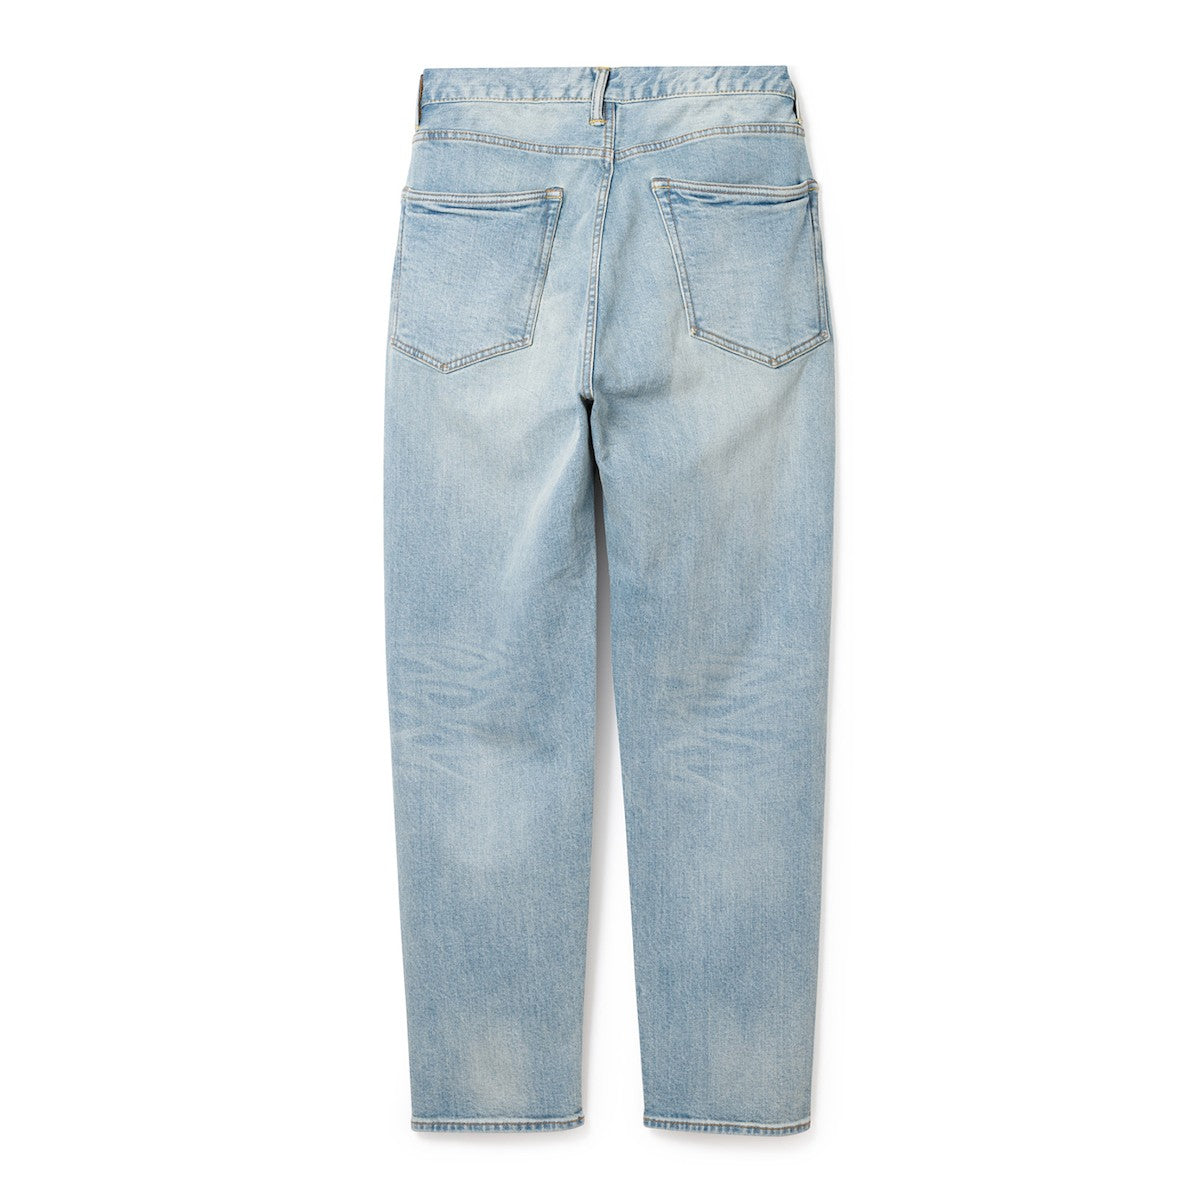 Damaged Denim Pants - Stretch Easy Fit Tapered